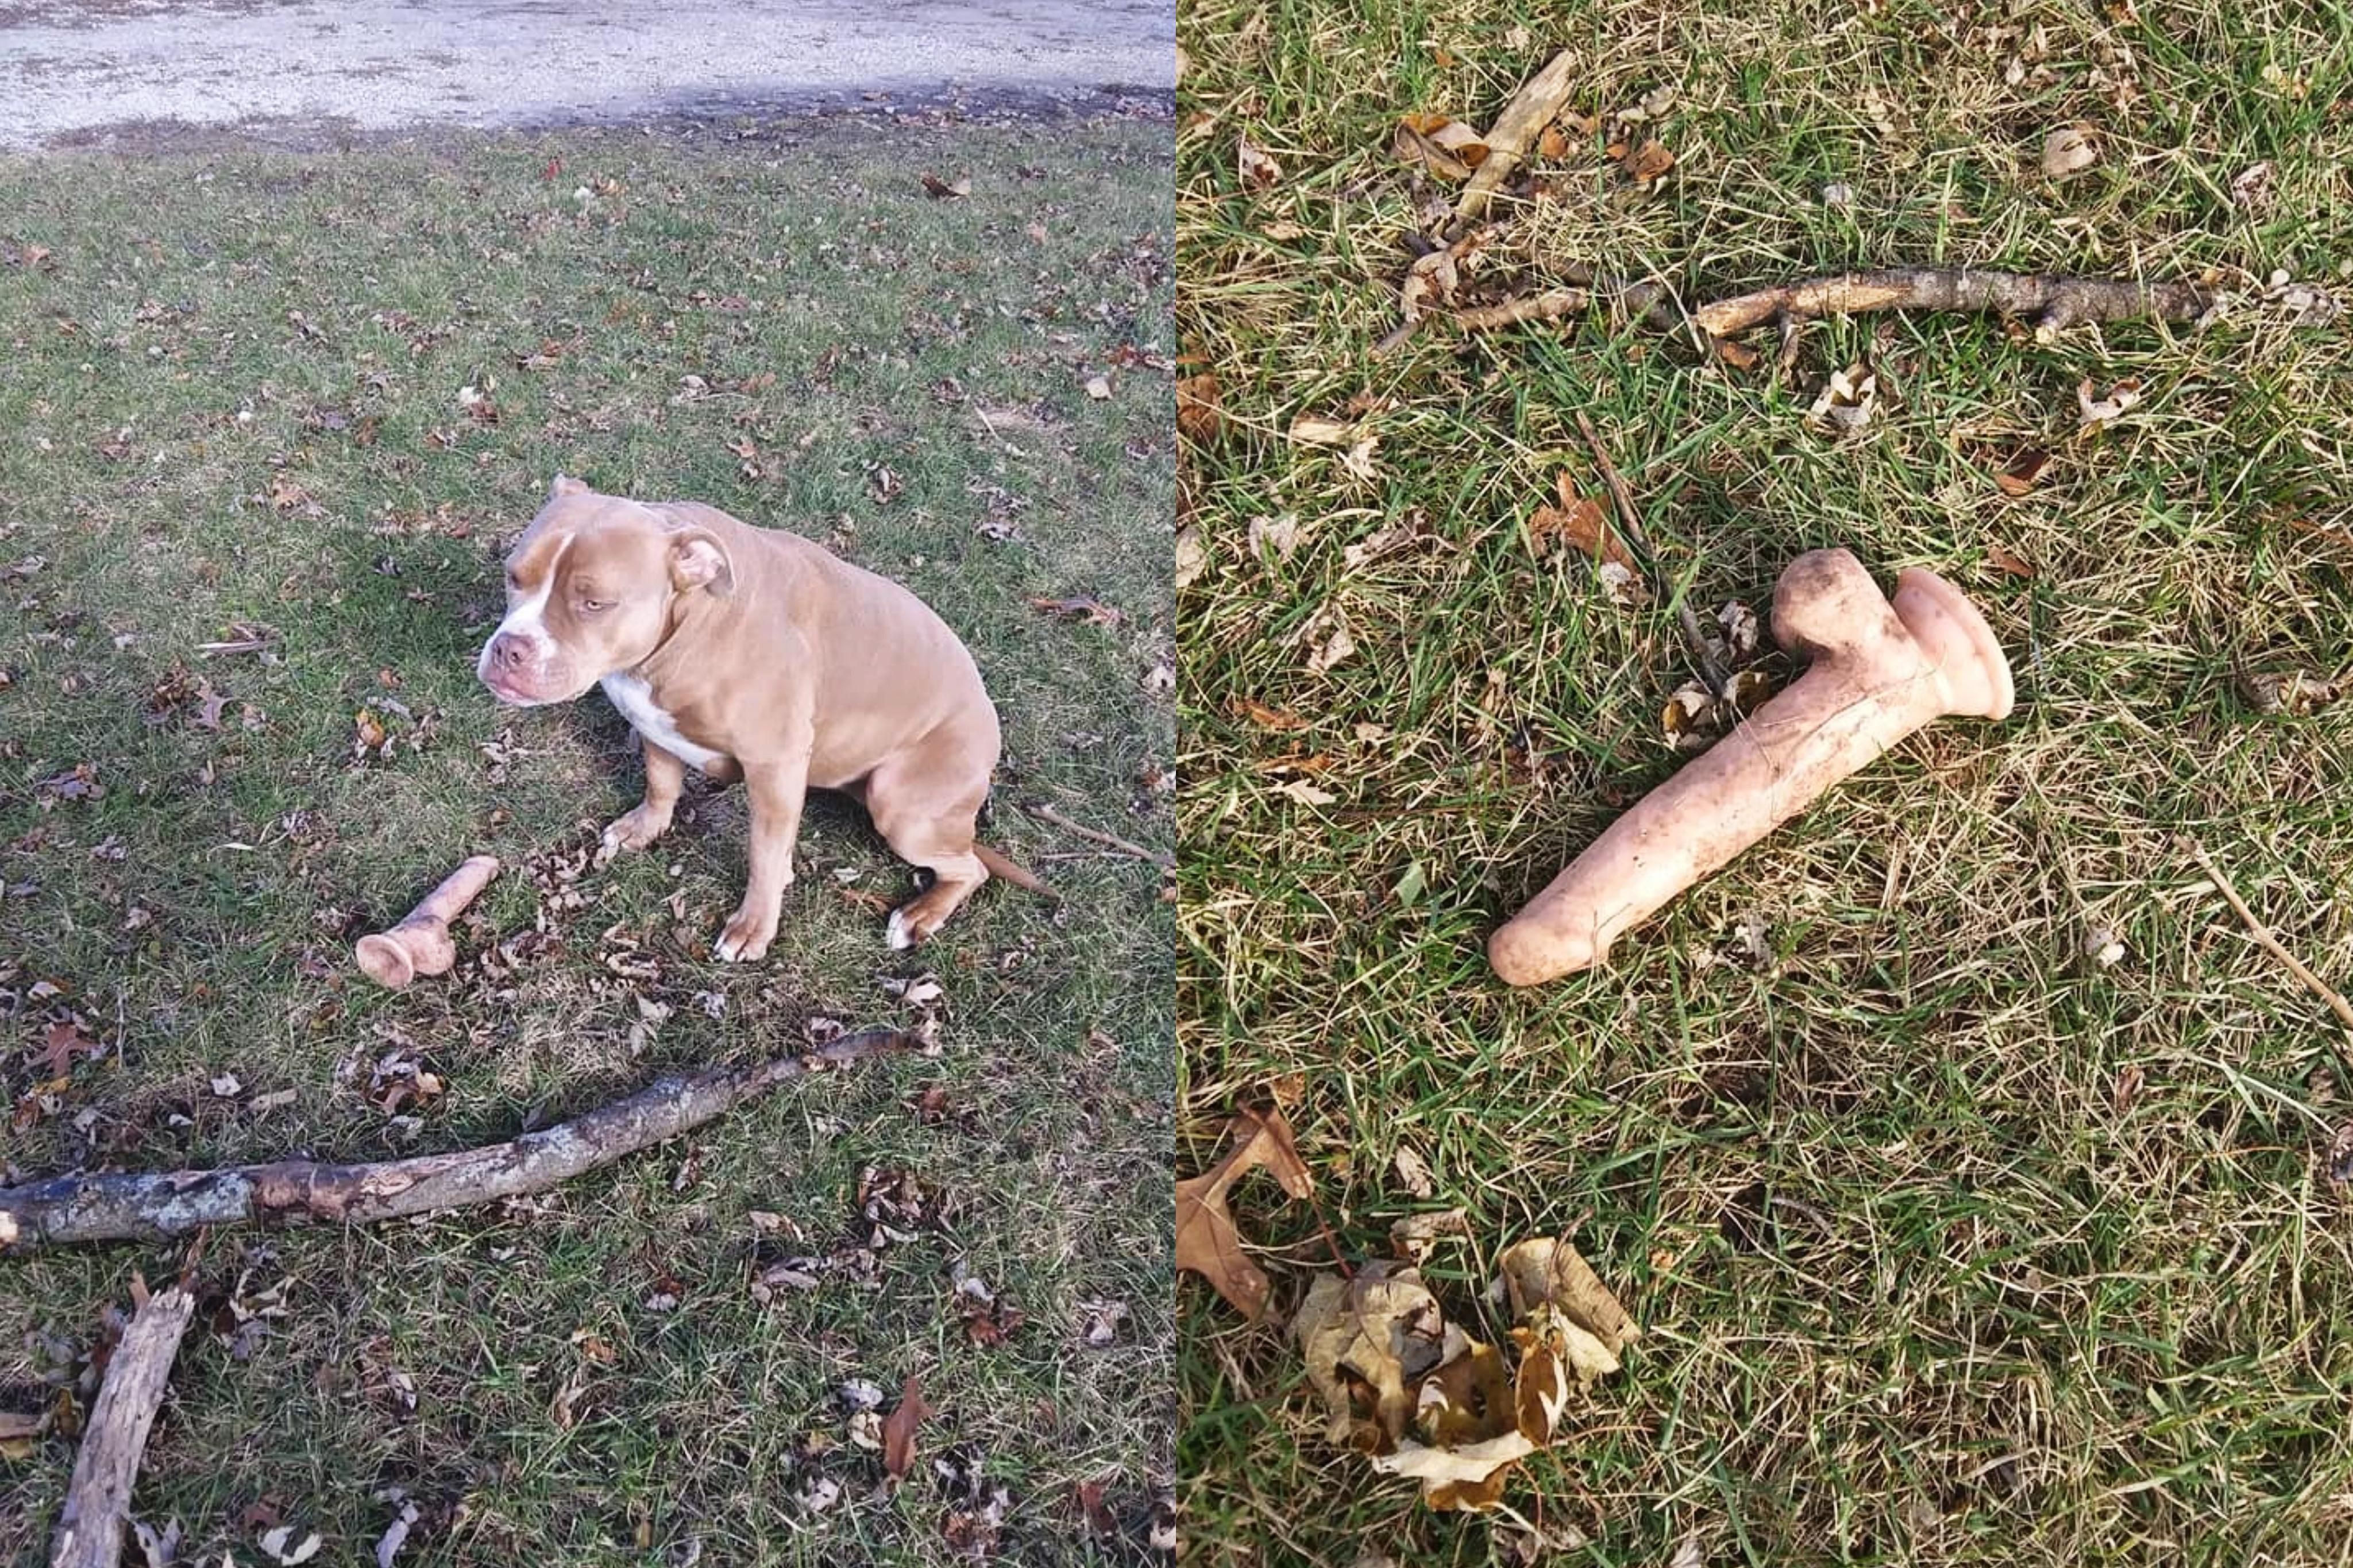 ‘If any of y’all are missing a dildo, my dog found it’